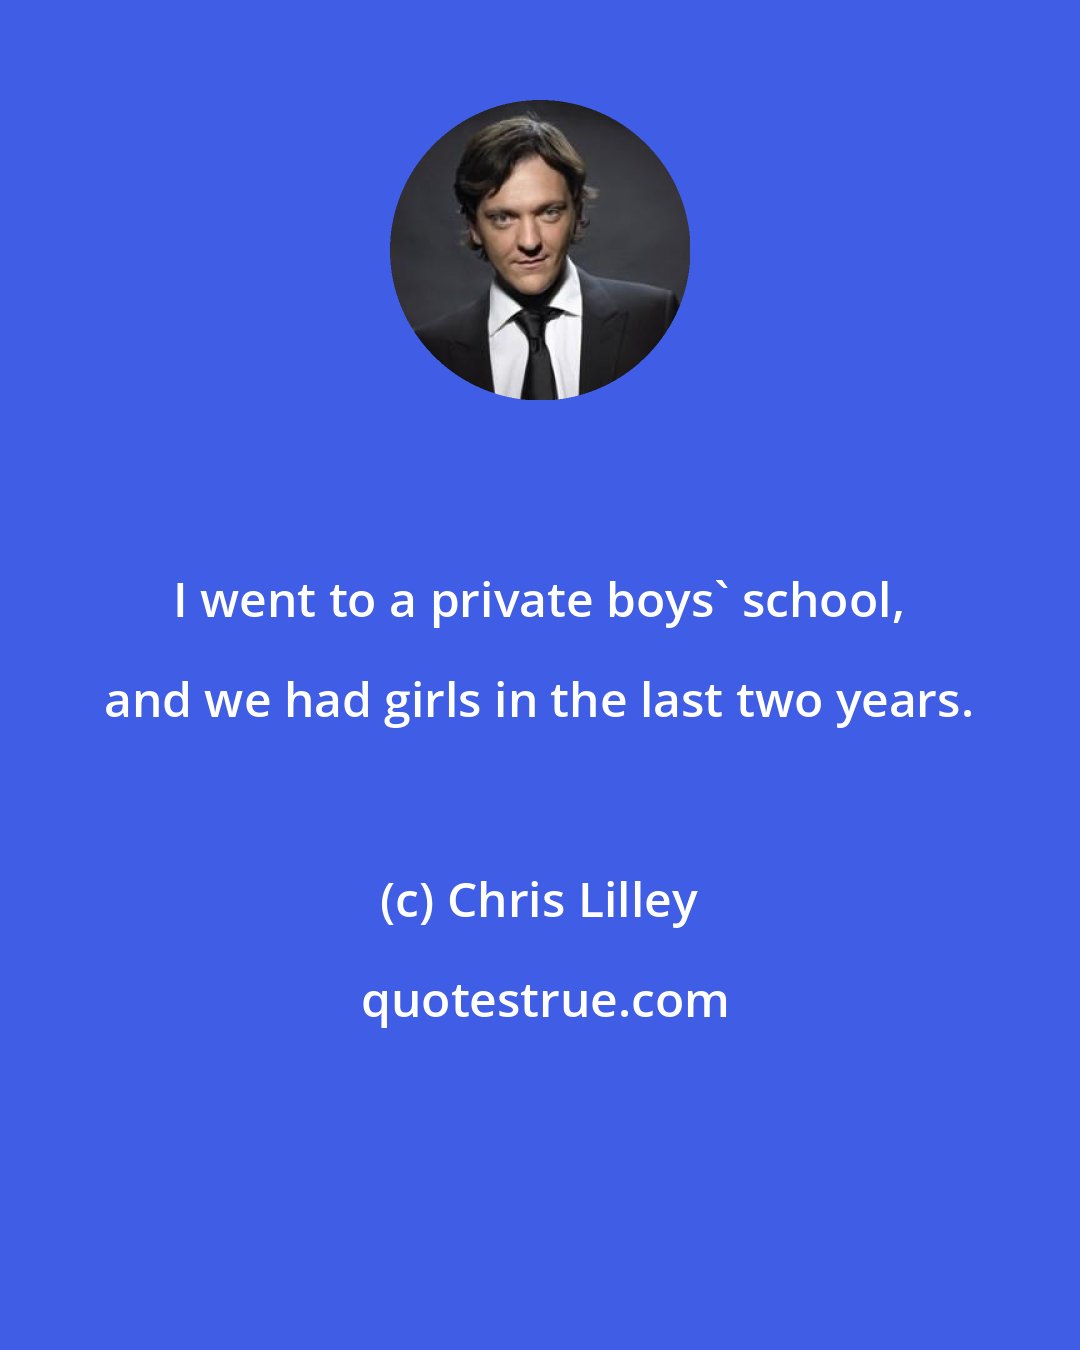 Chris Lilley: I went to a private boys' school, and we had girls in the last two years.